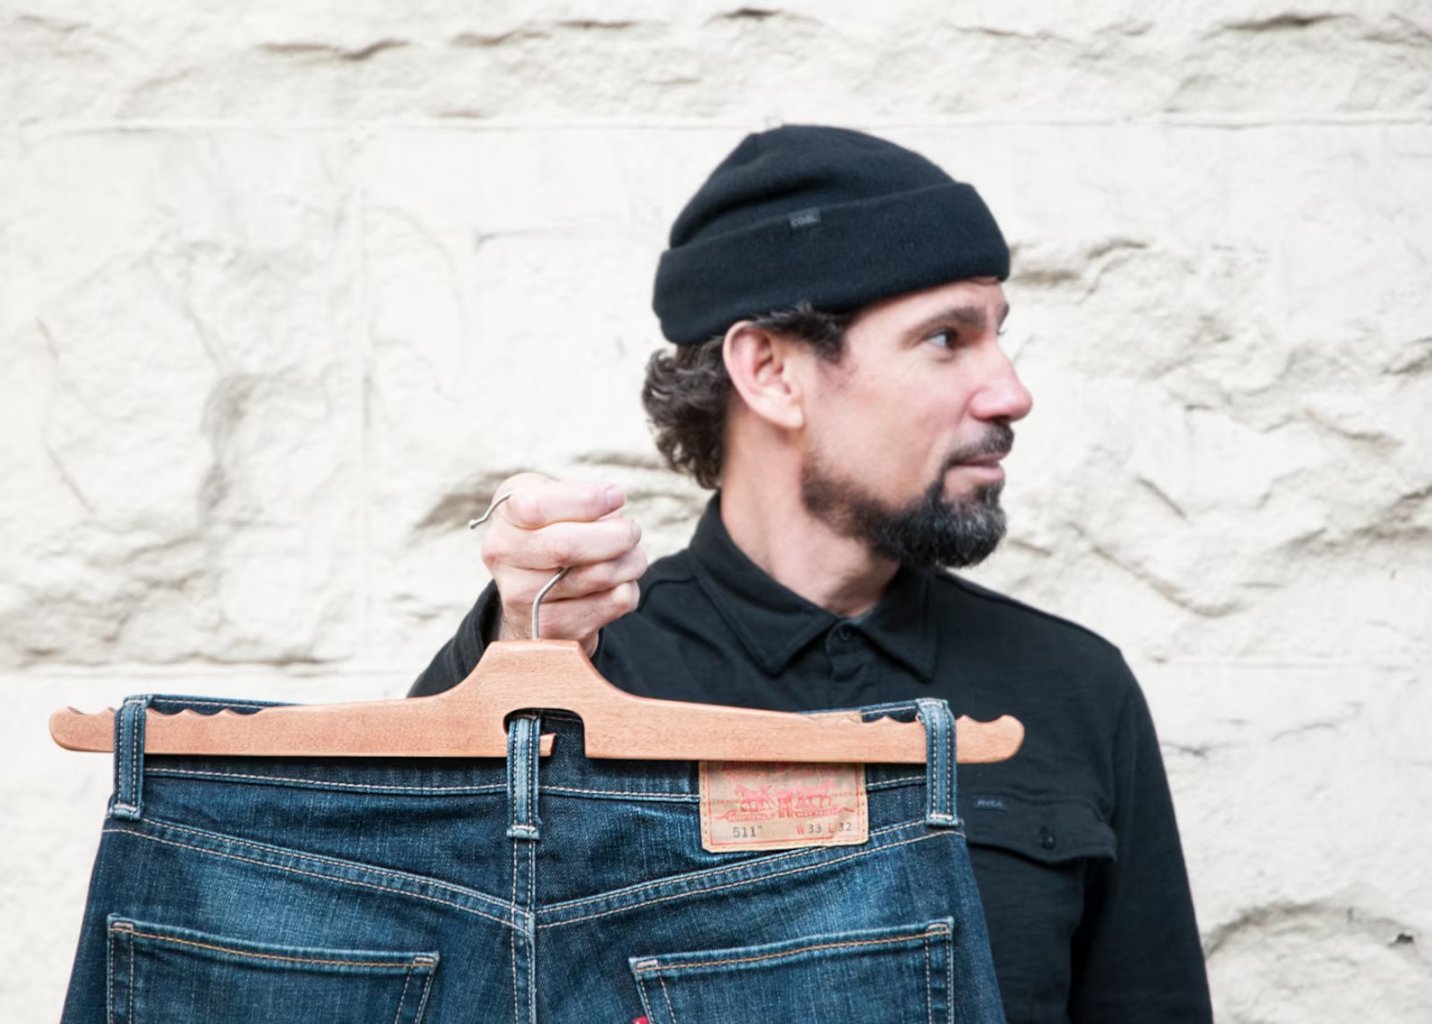 The Saldebus Jeans Hanger – The perfect way to hang your jeans